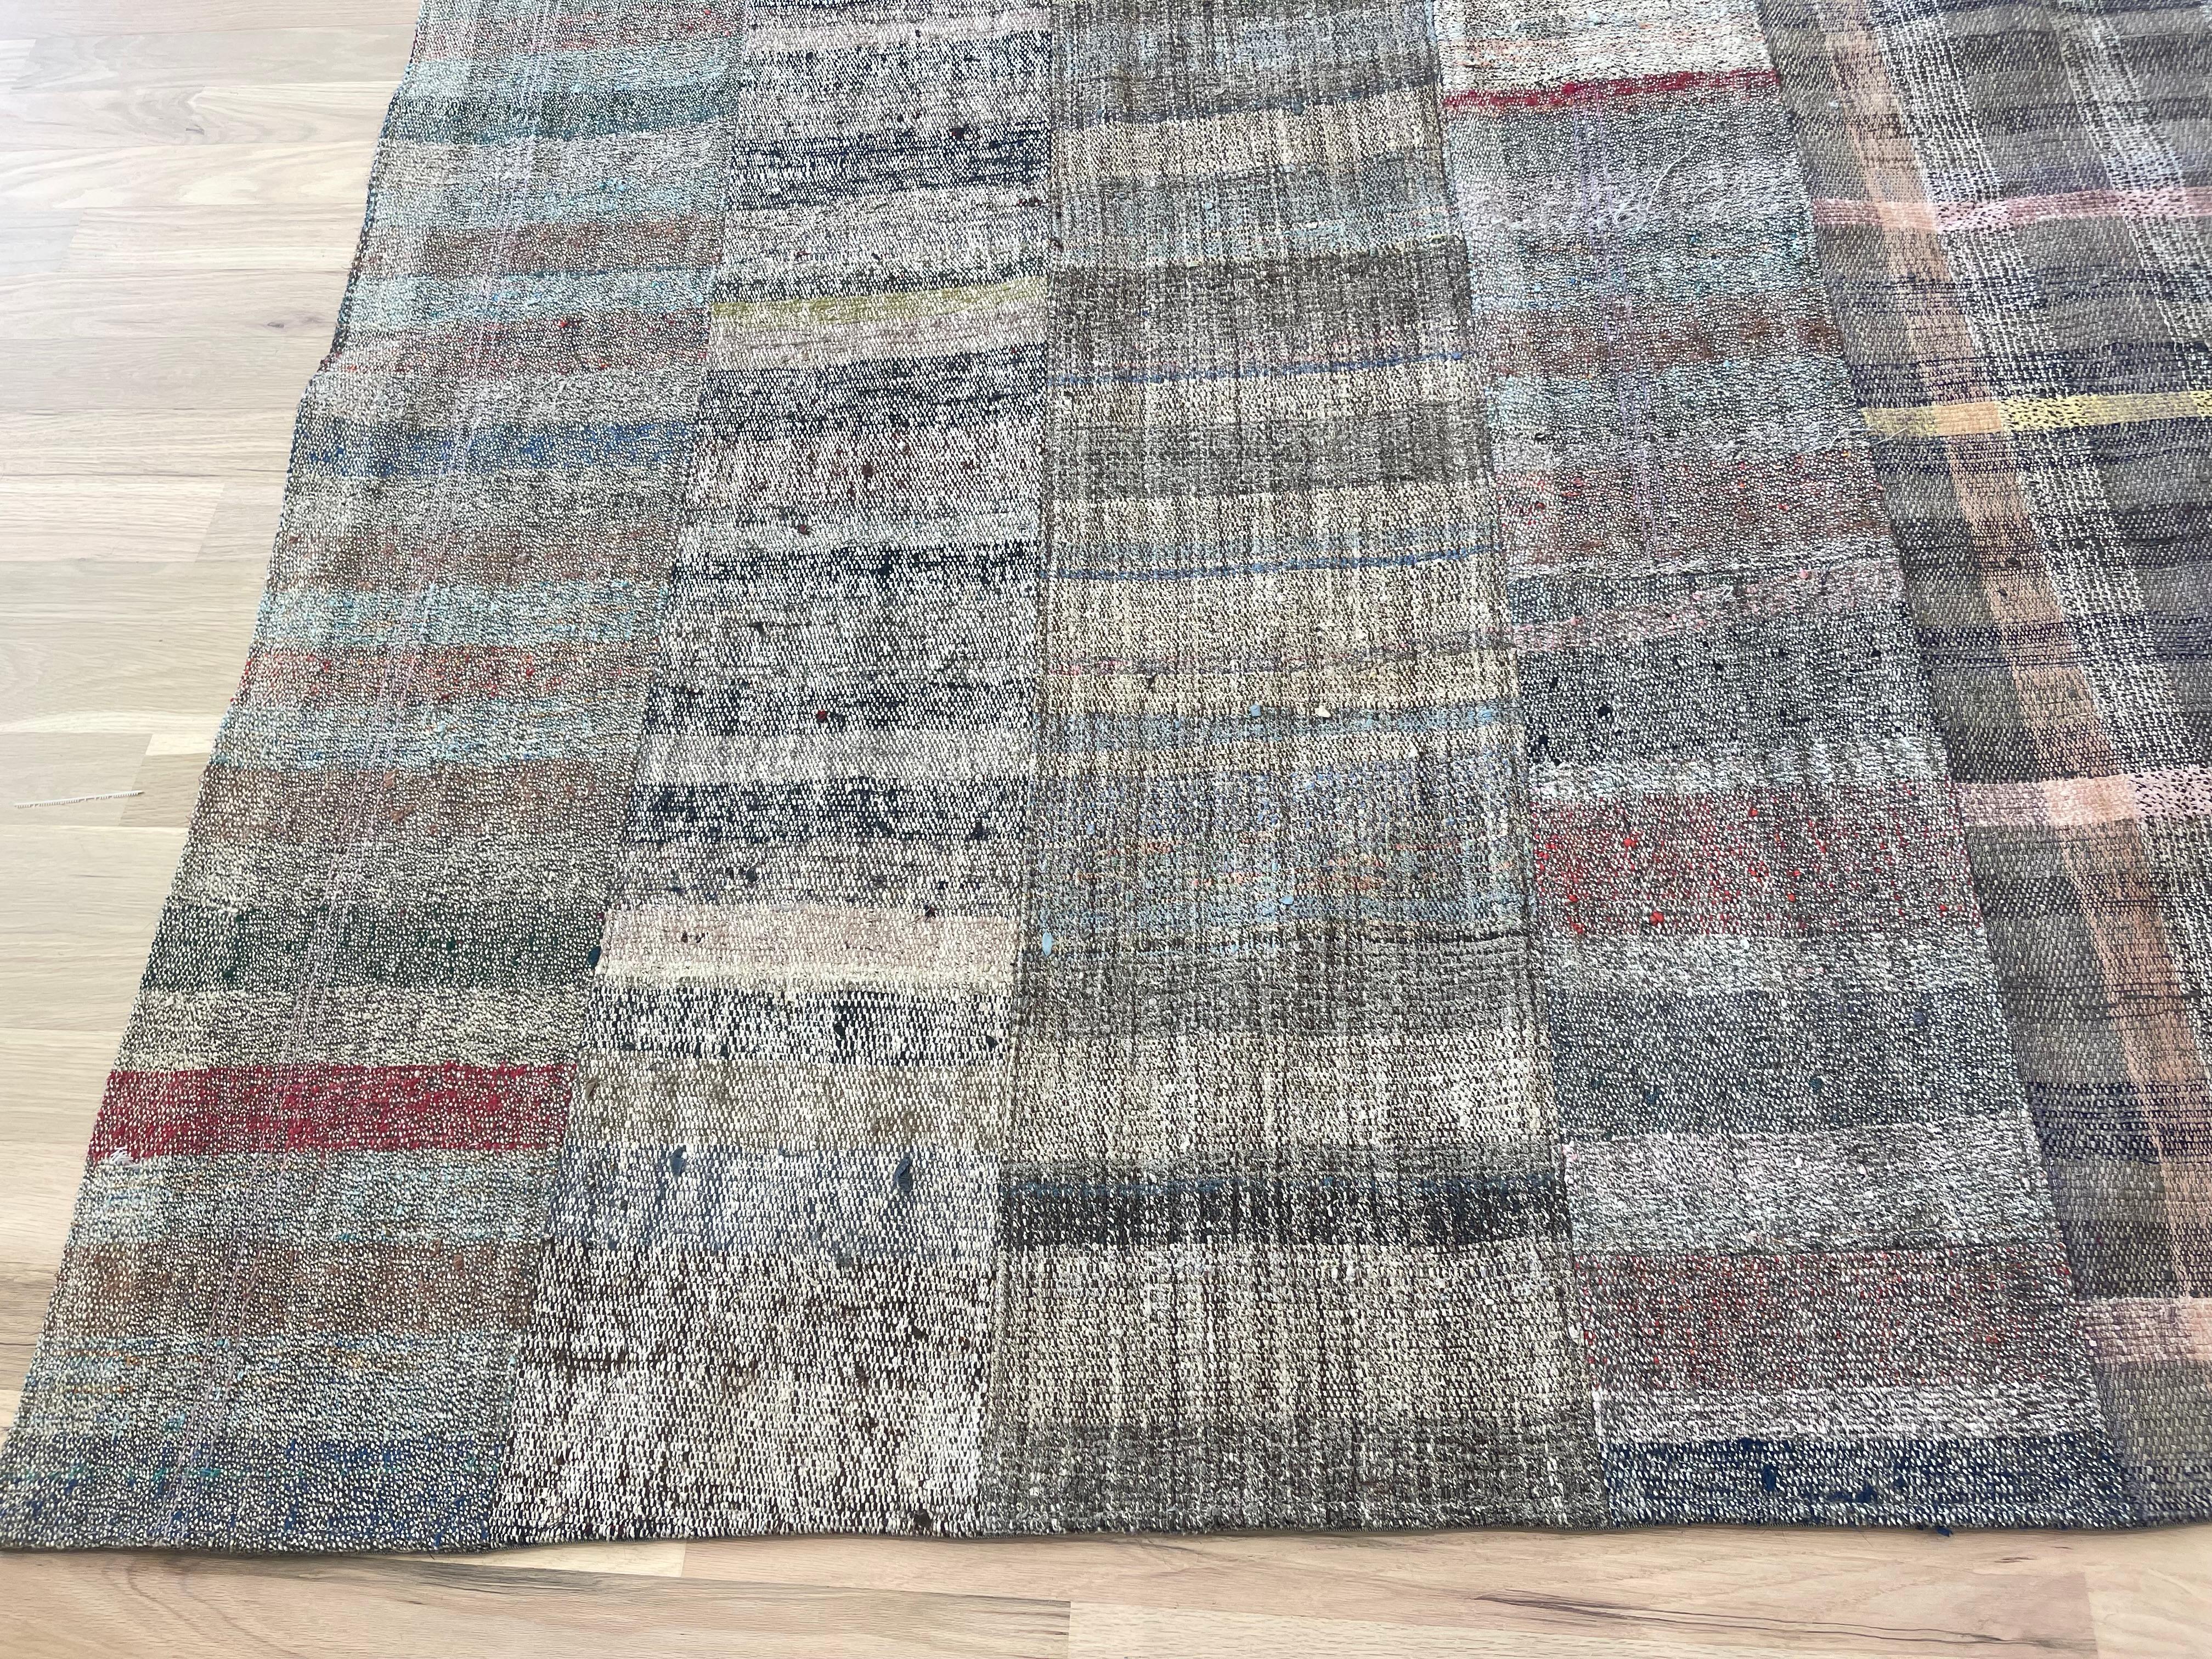 This Turkish rug features a colorful geometric design  allowing you to switch up your decor. Add a touch of style to any room while also having the option to change things up to suit your mood. Beautiful and versatile, this rug is a must-have for